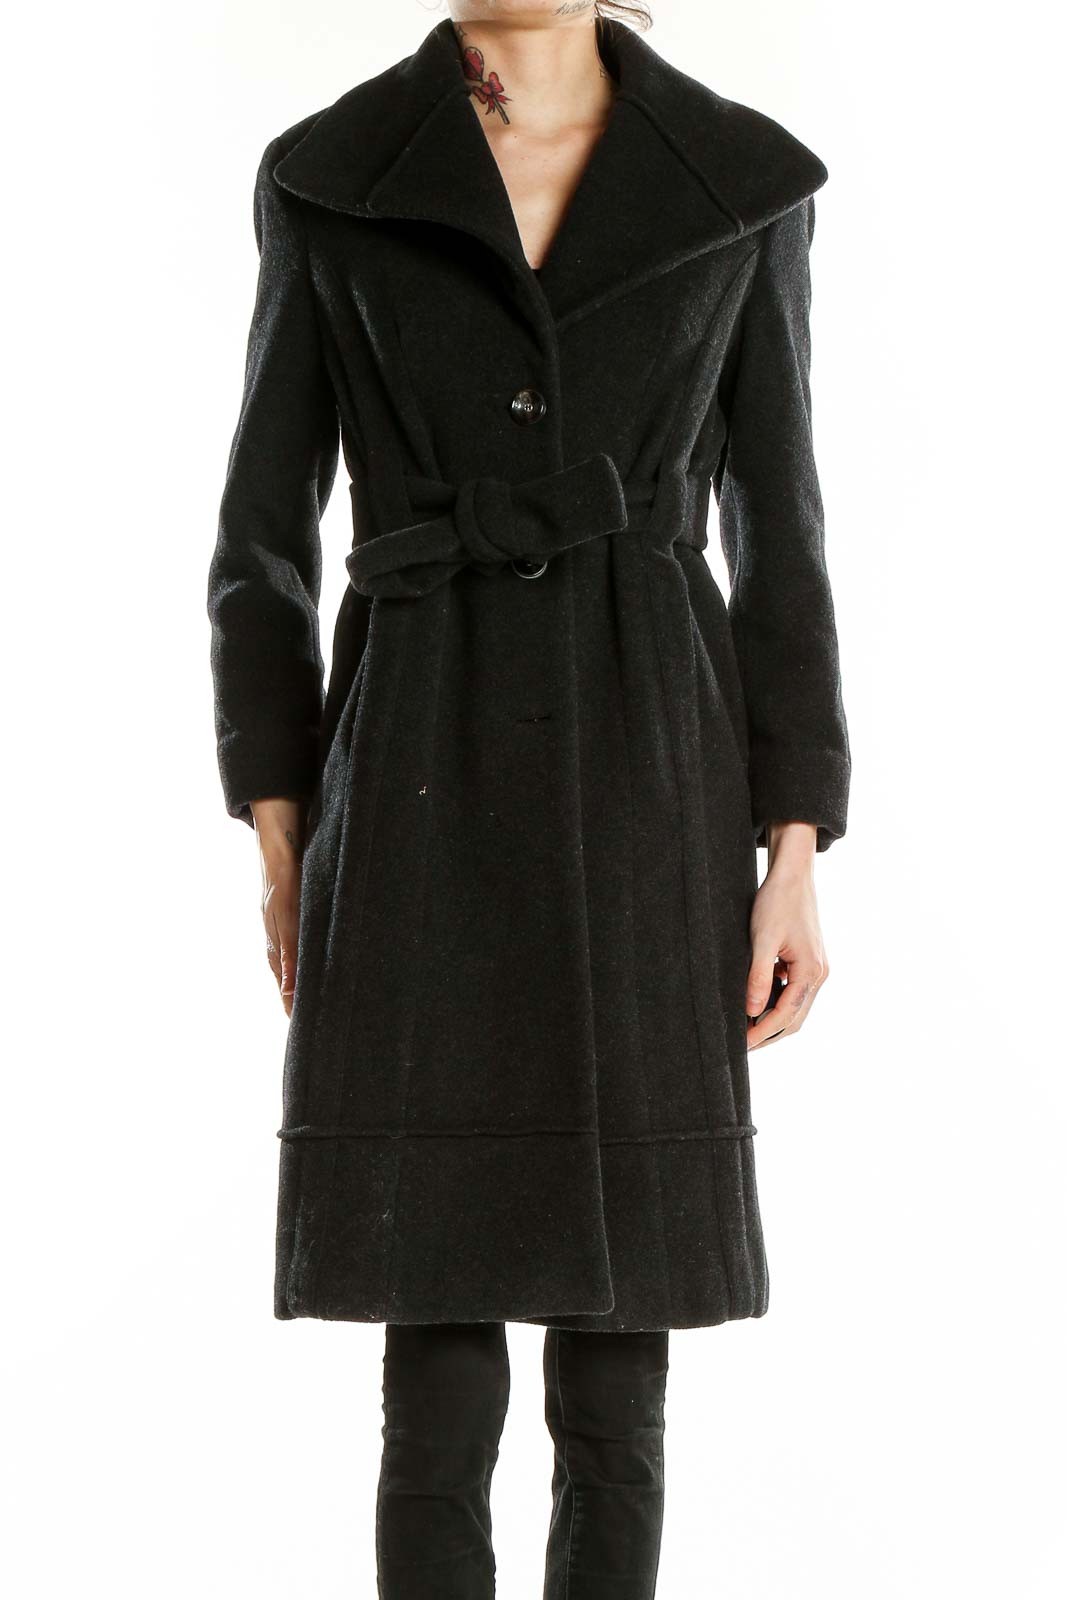 Black Single Breasted Coat Front